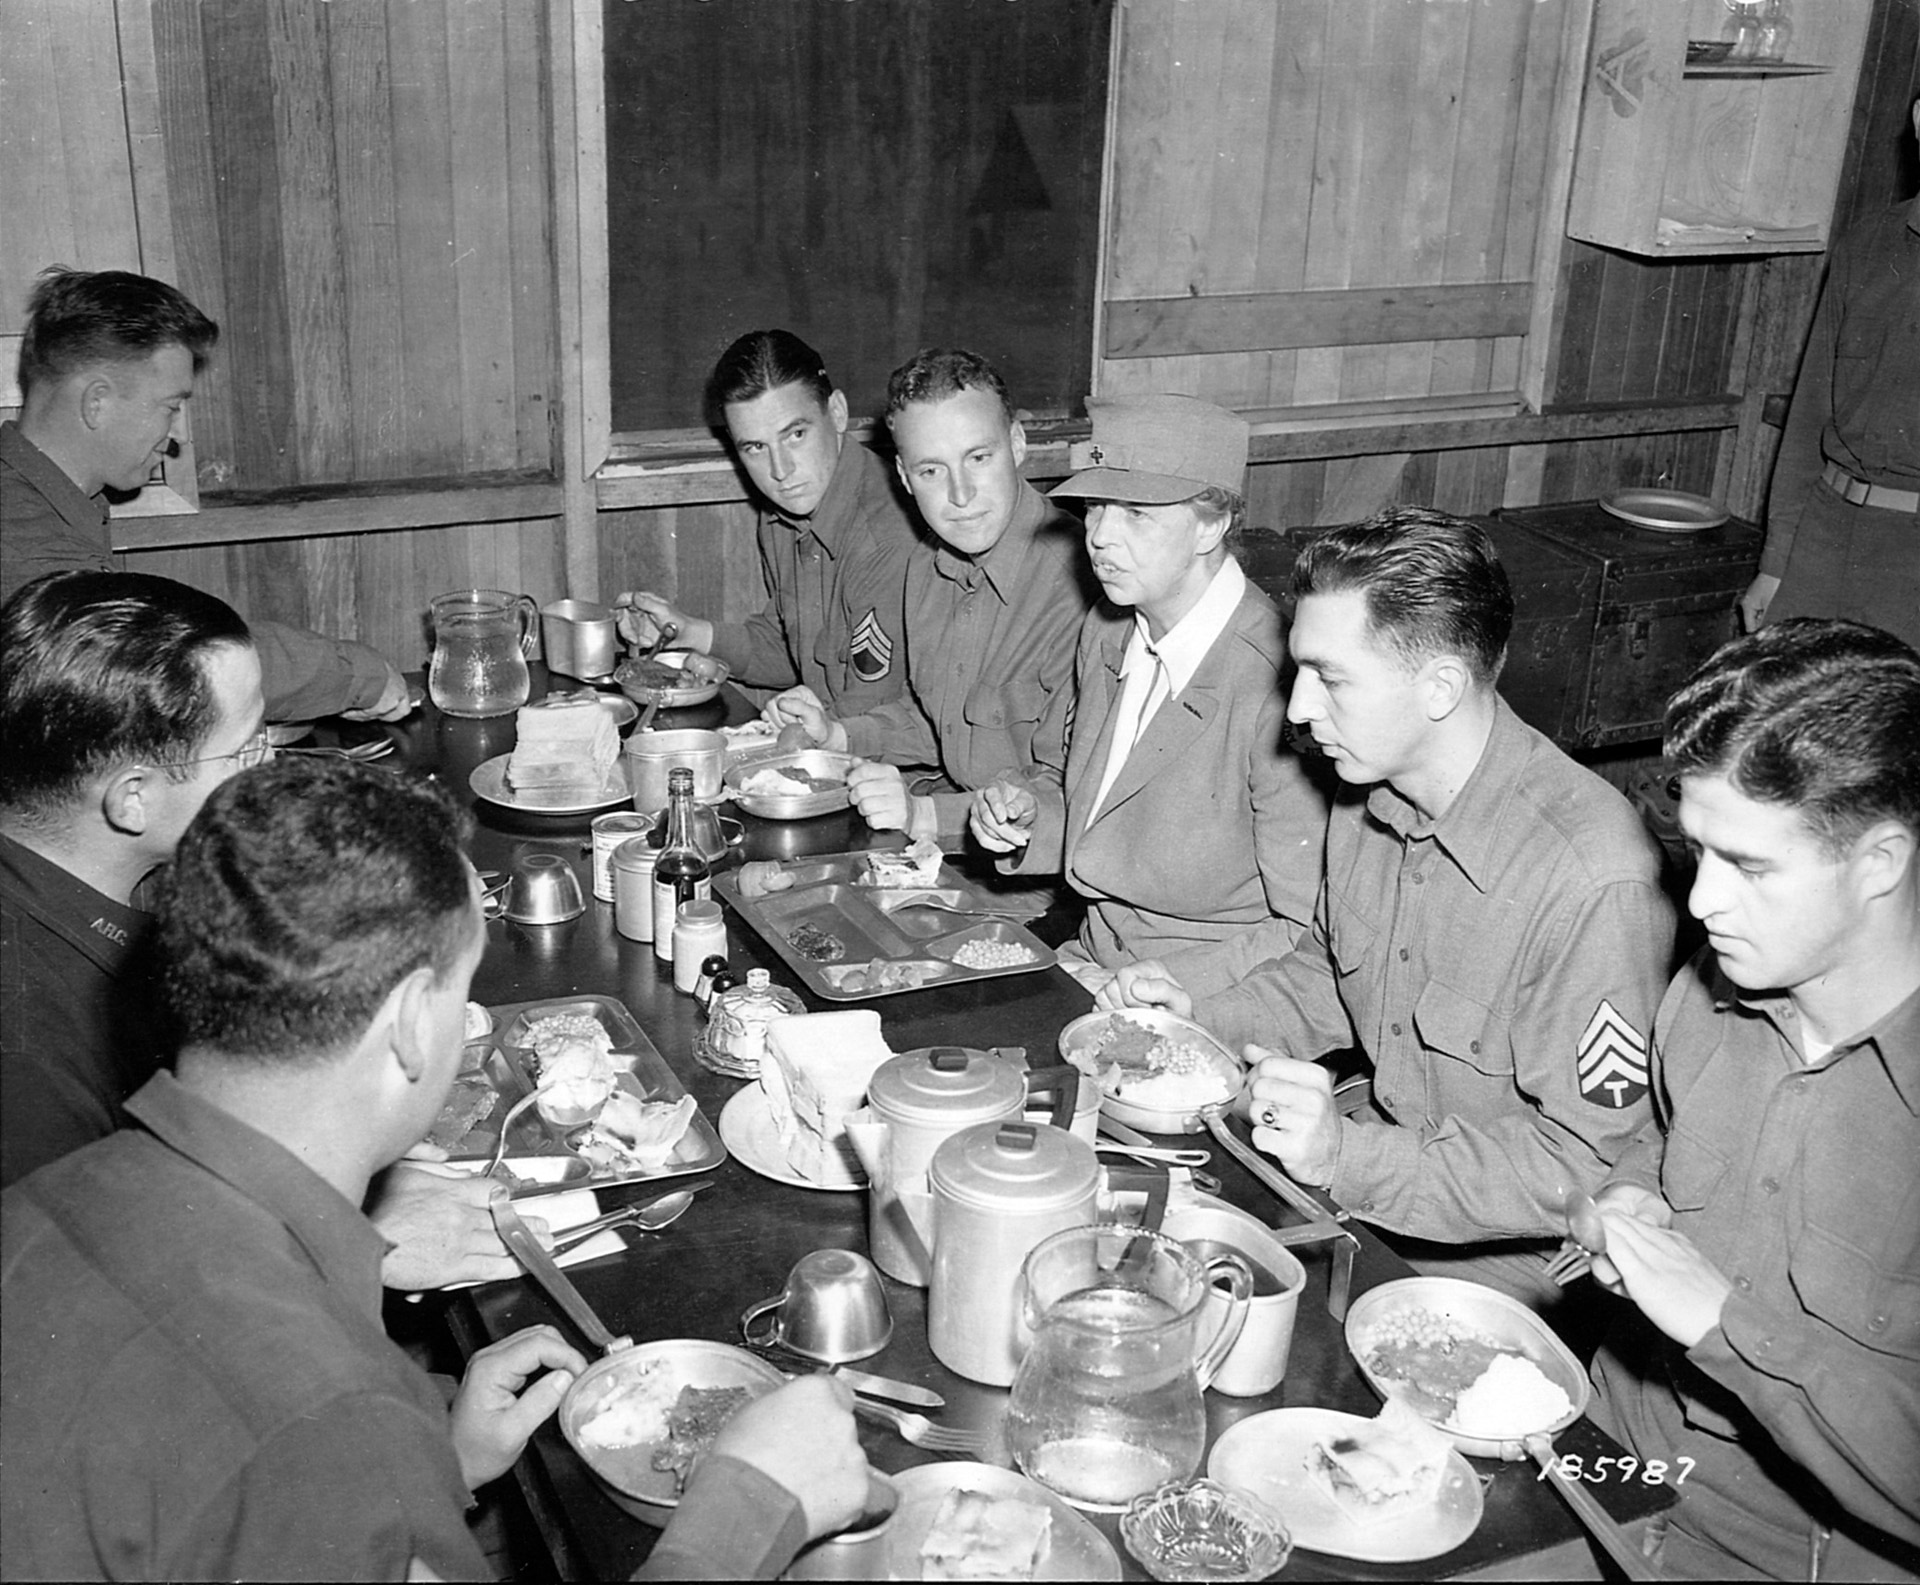 Sharing a meal with a group of NCOs of the 32nd Infantry Division in the Gilbert Islands, Eleanor Roosevelt displays her ability to communicate effectively, 1943.